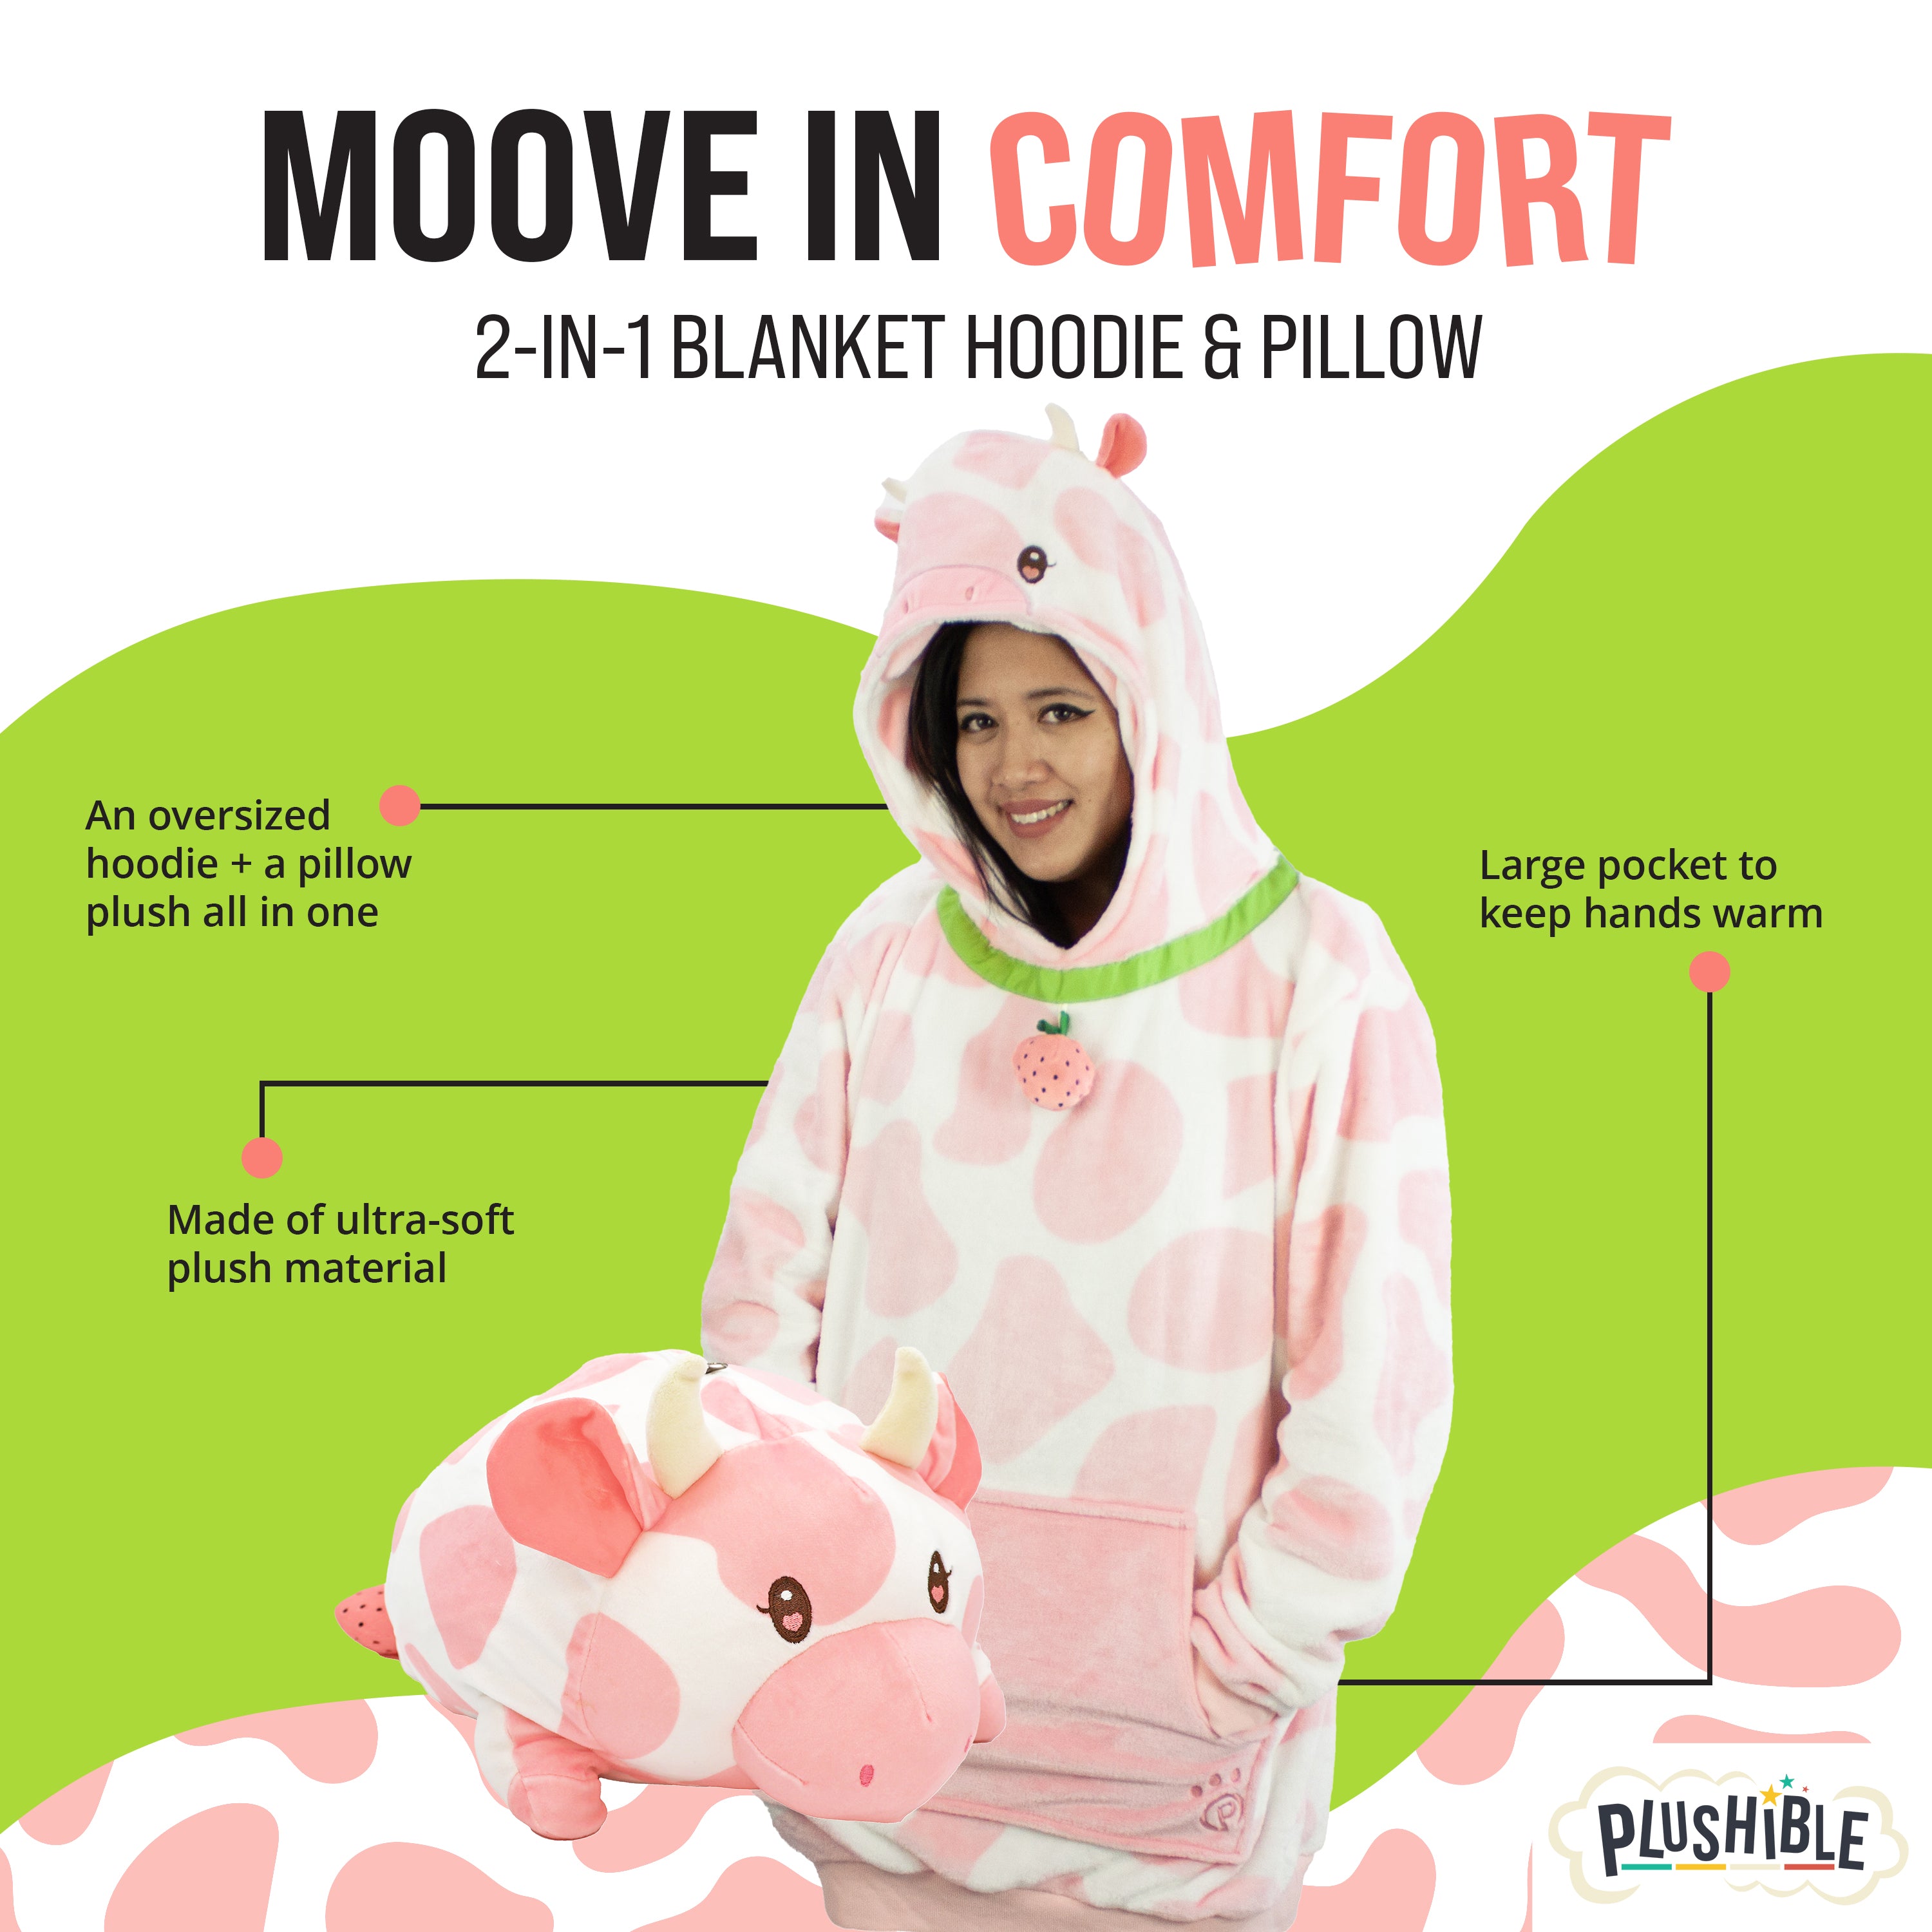 Strawberry Cow Snugible 2-in-1 Blanket Hoodie & Pillow